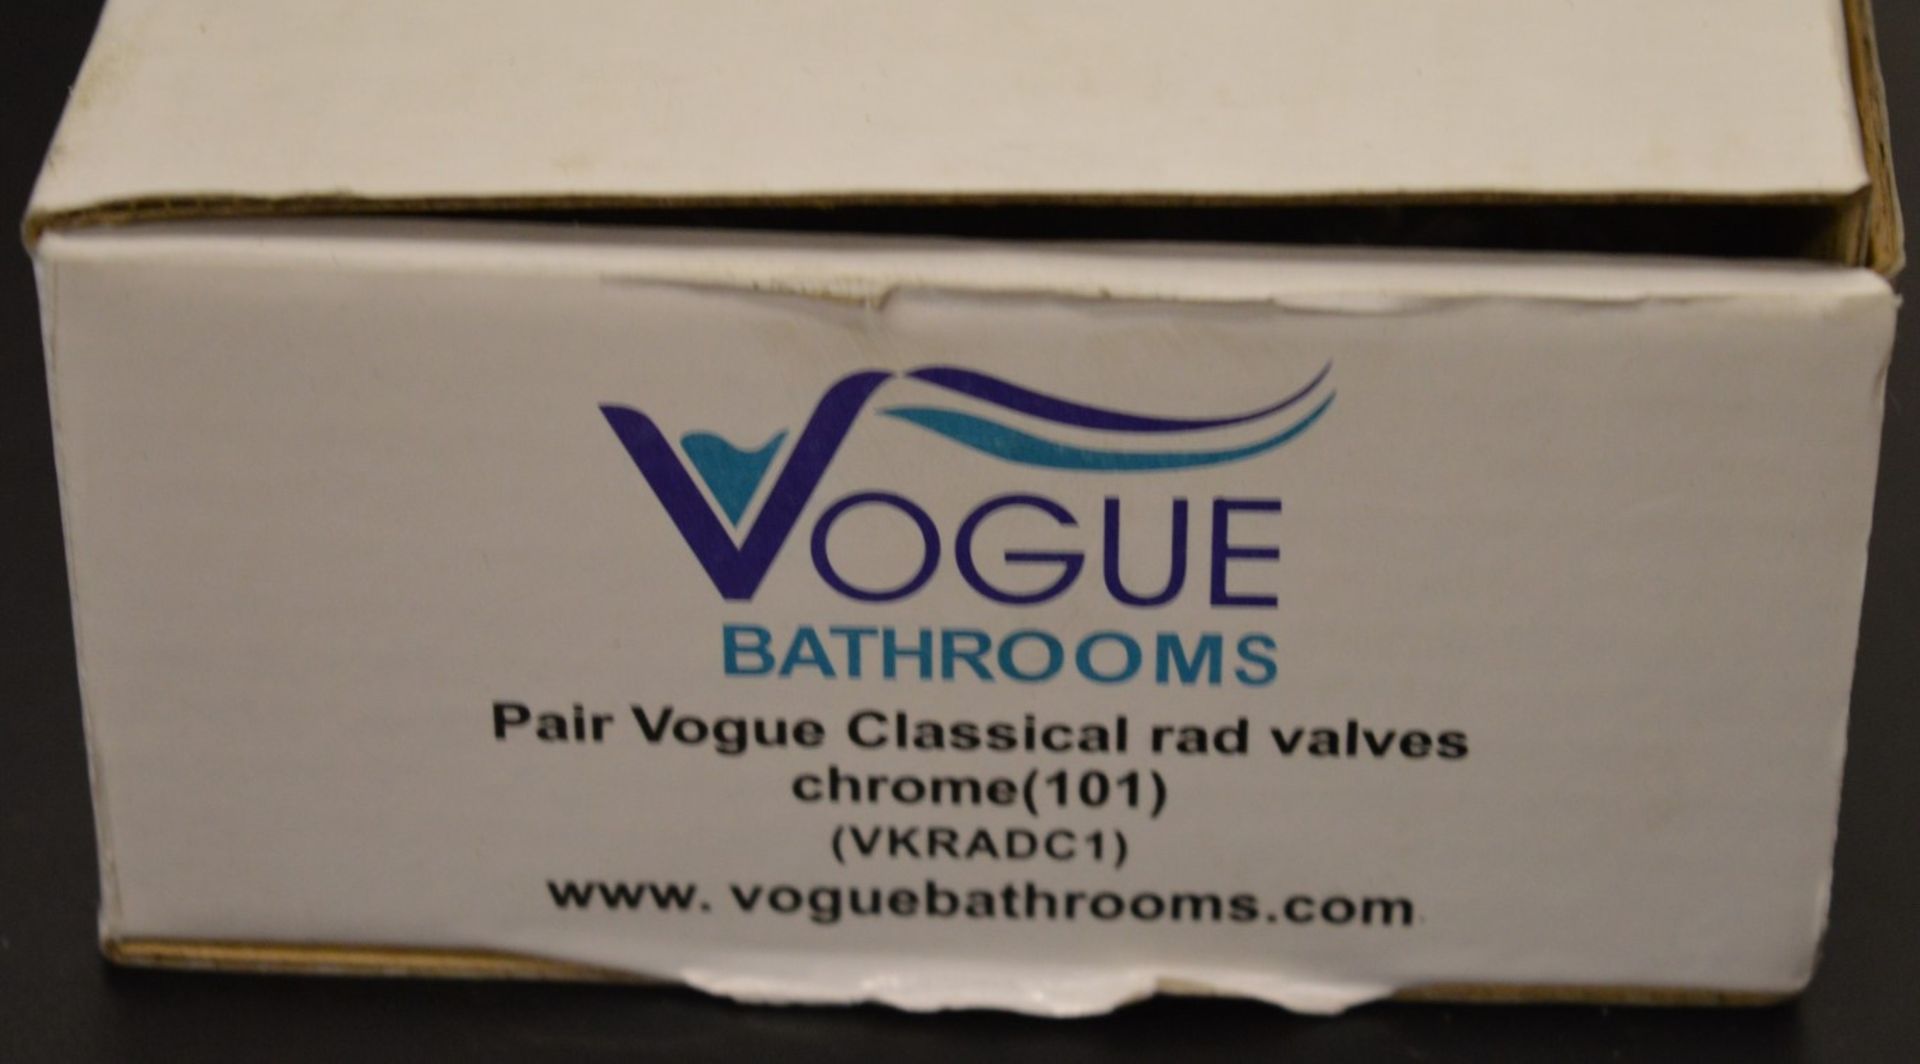 10 x Vogue Bathrooms Pairs of Classical Chrome Radiator Valves - Product Code: VKRADC1 - Brand New - Image 7 of 10